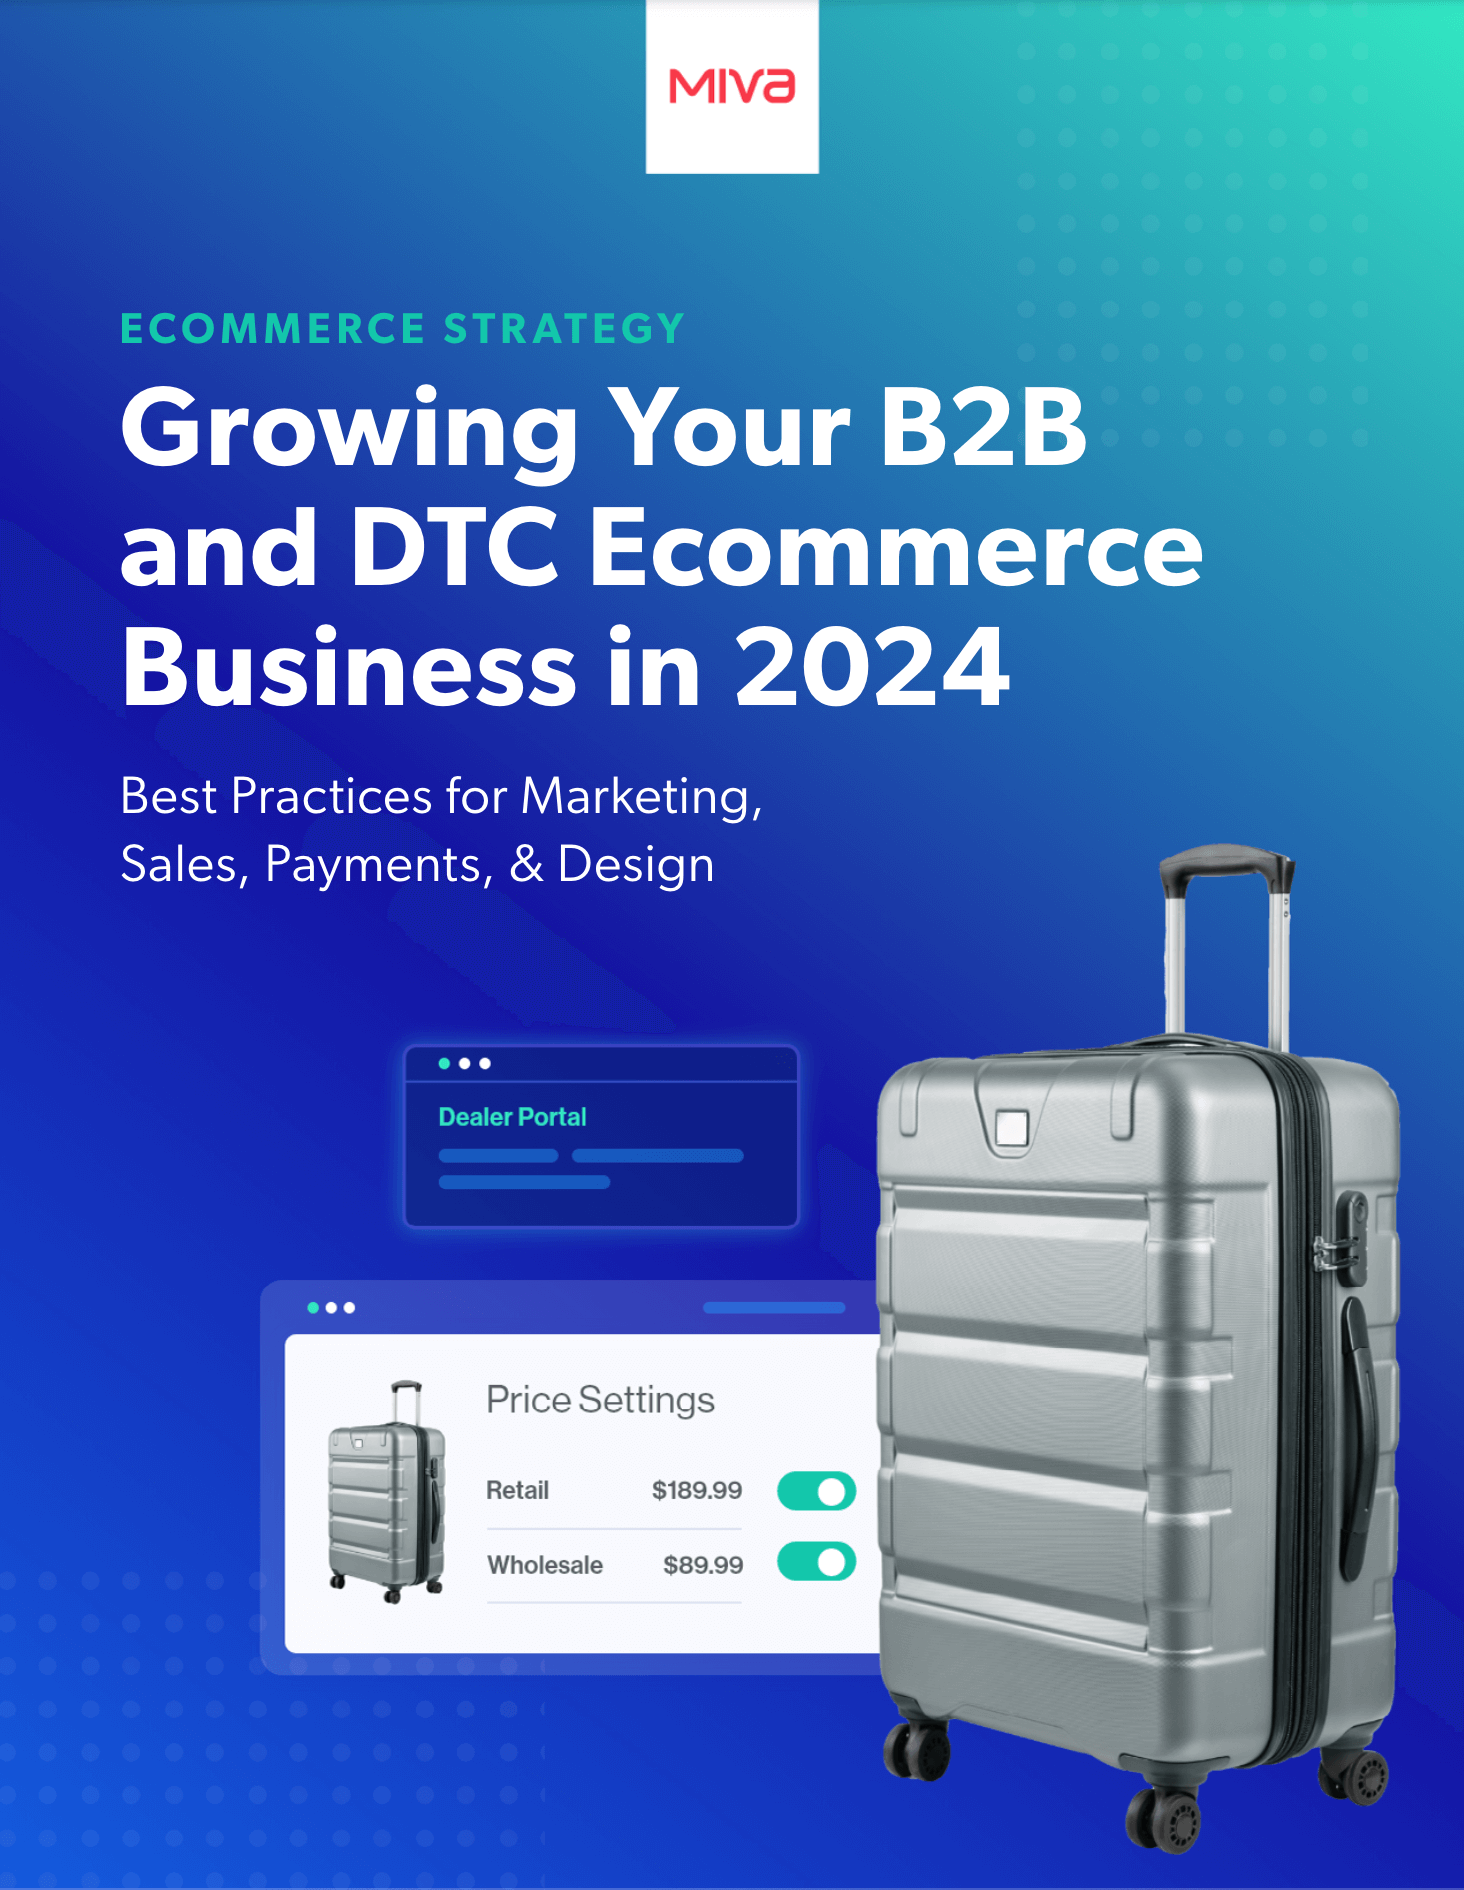 Cover for Growing Your B2B and DTC Ecommerce Business in 2024 whitepaper.